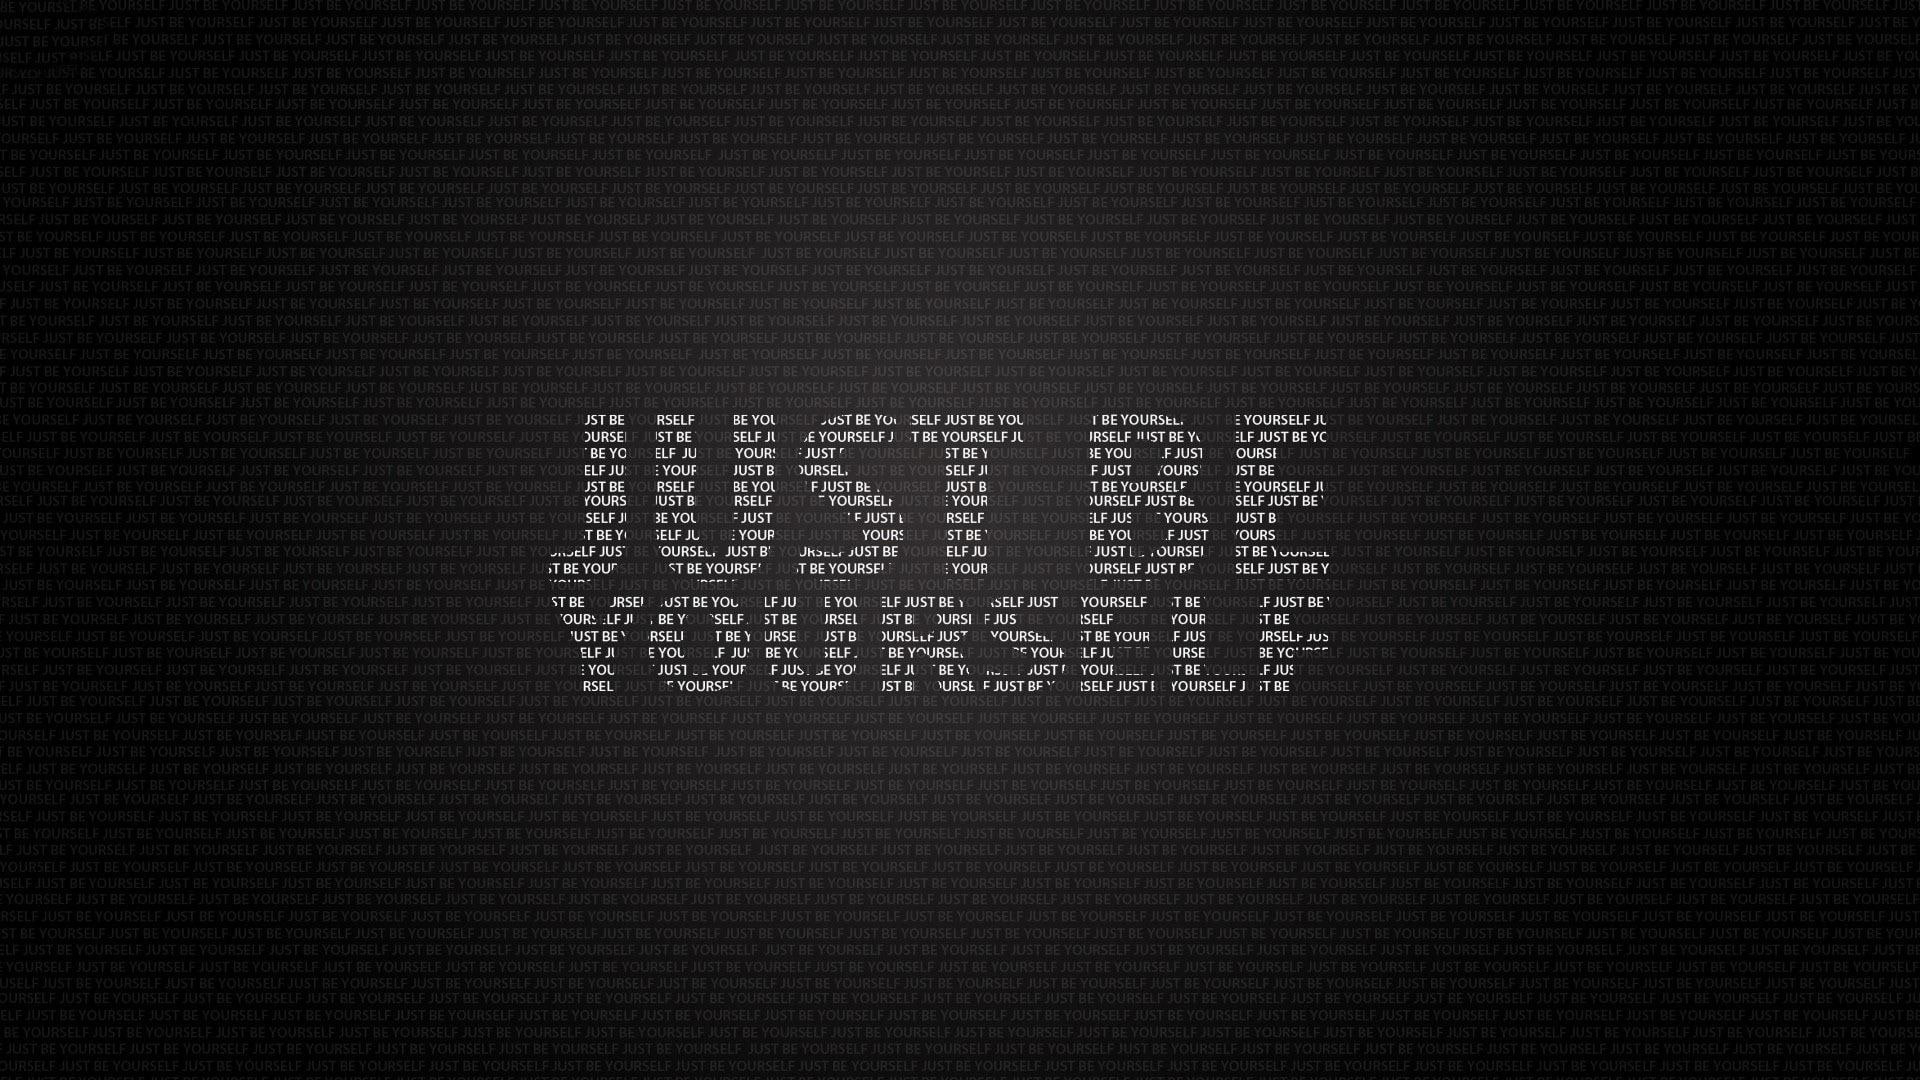 Just be yourself wallpaper, just be yourself quote, quotes, 1920x1080, motivation